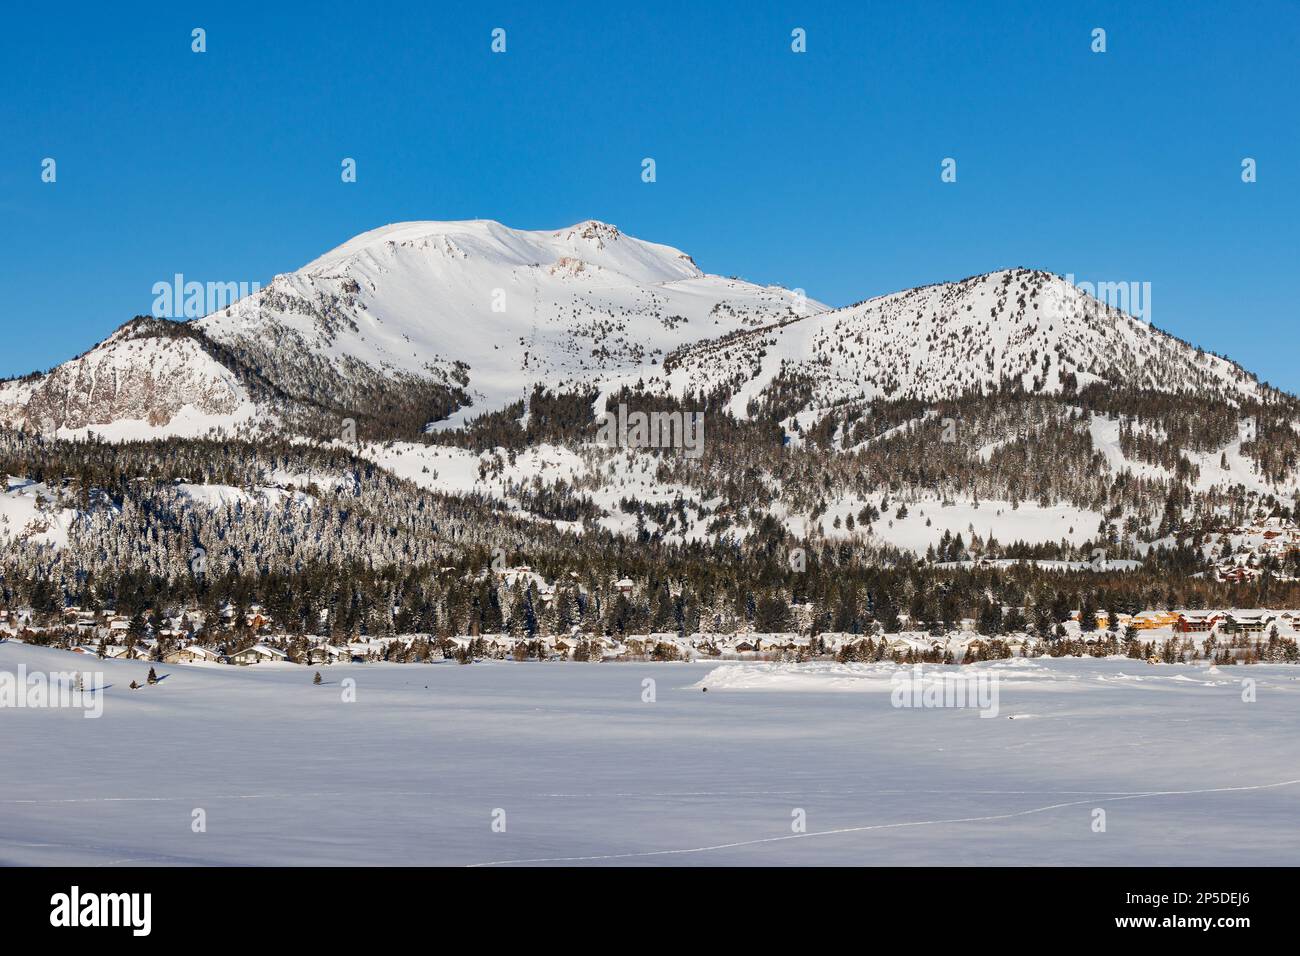 A view of snow-covered Mammoth Mountain ski resort with blue skies after a record snowfall. Stock Photo